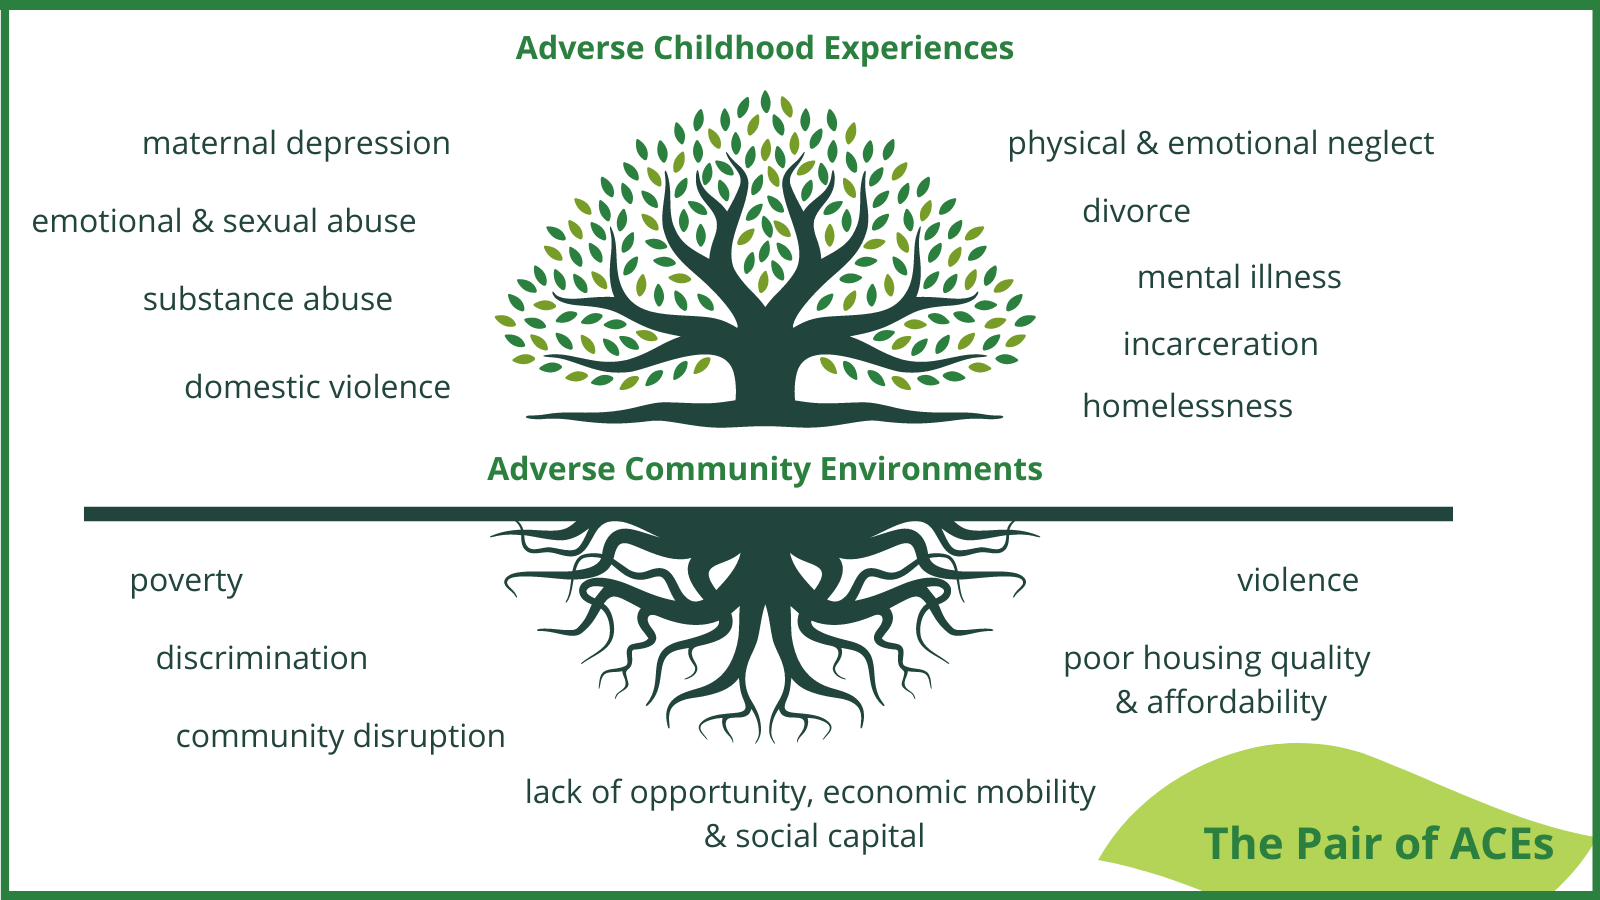 pair of ACEs illustration; tree blooming with roots below in center surrounded by list of adverse childhood experiences (maternal depression, emotional & sexual abuse, substance abuse, domestic violence, physical & emotional neglect, divorce, mental illness, incarceration, homelessness) and adverse community environments (poverty, discrimination, community disruption, violence, poor housing quality & affordability, and lack of opportunity, economic mobility & social capital)